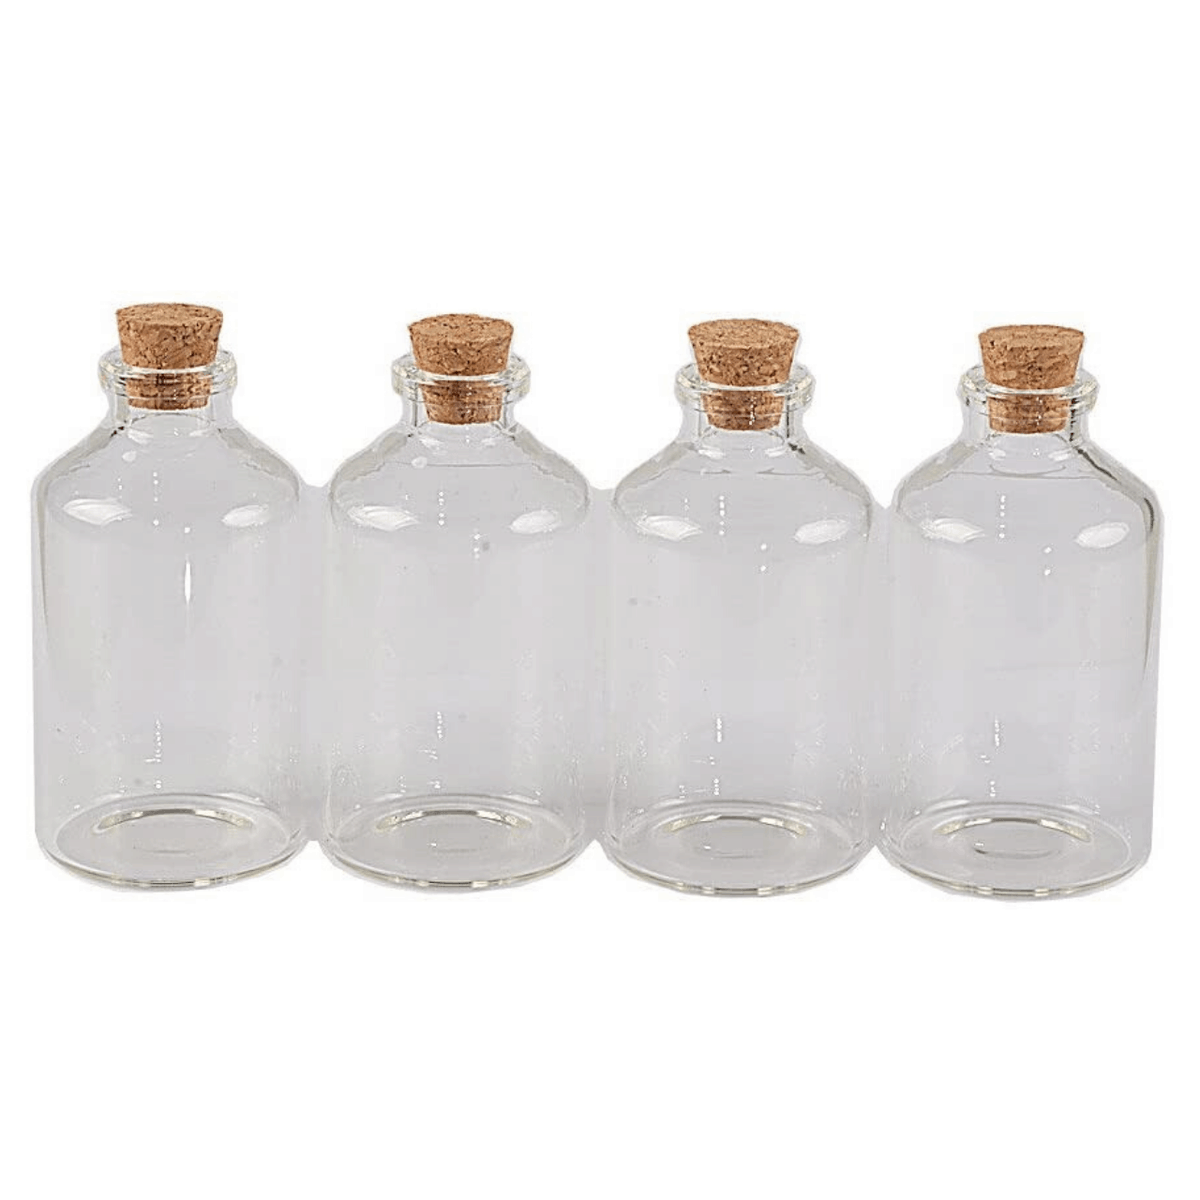 Four glass vials with cork tops